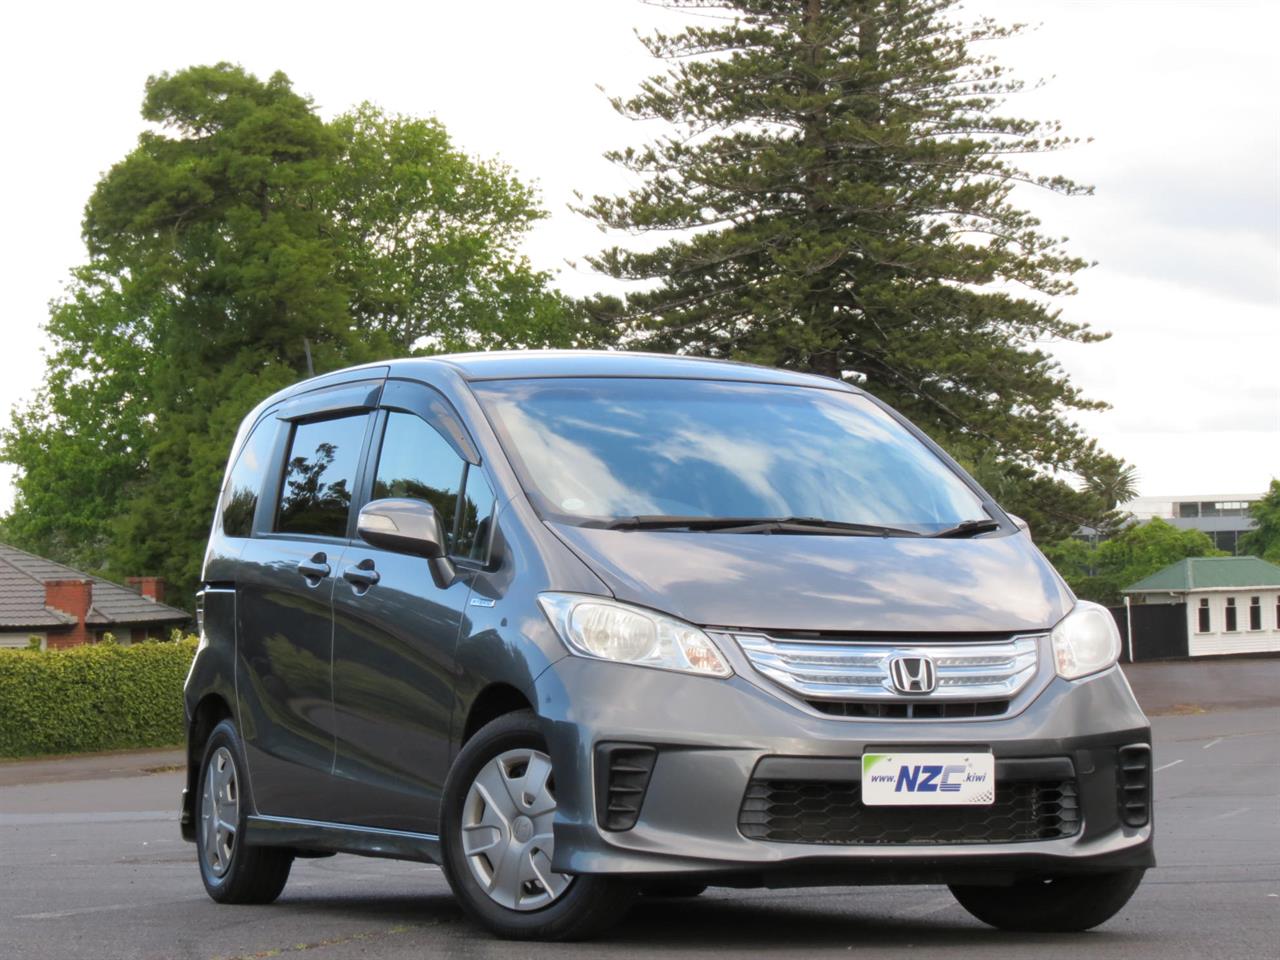 NZC best hot price for 2012 Honda Freed in Auckland